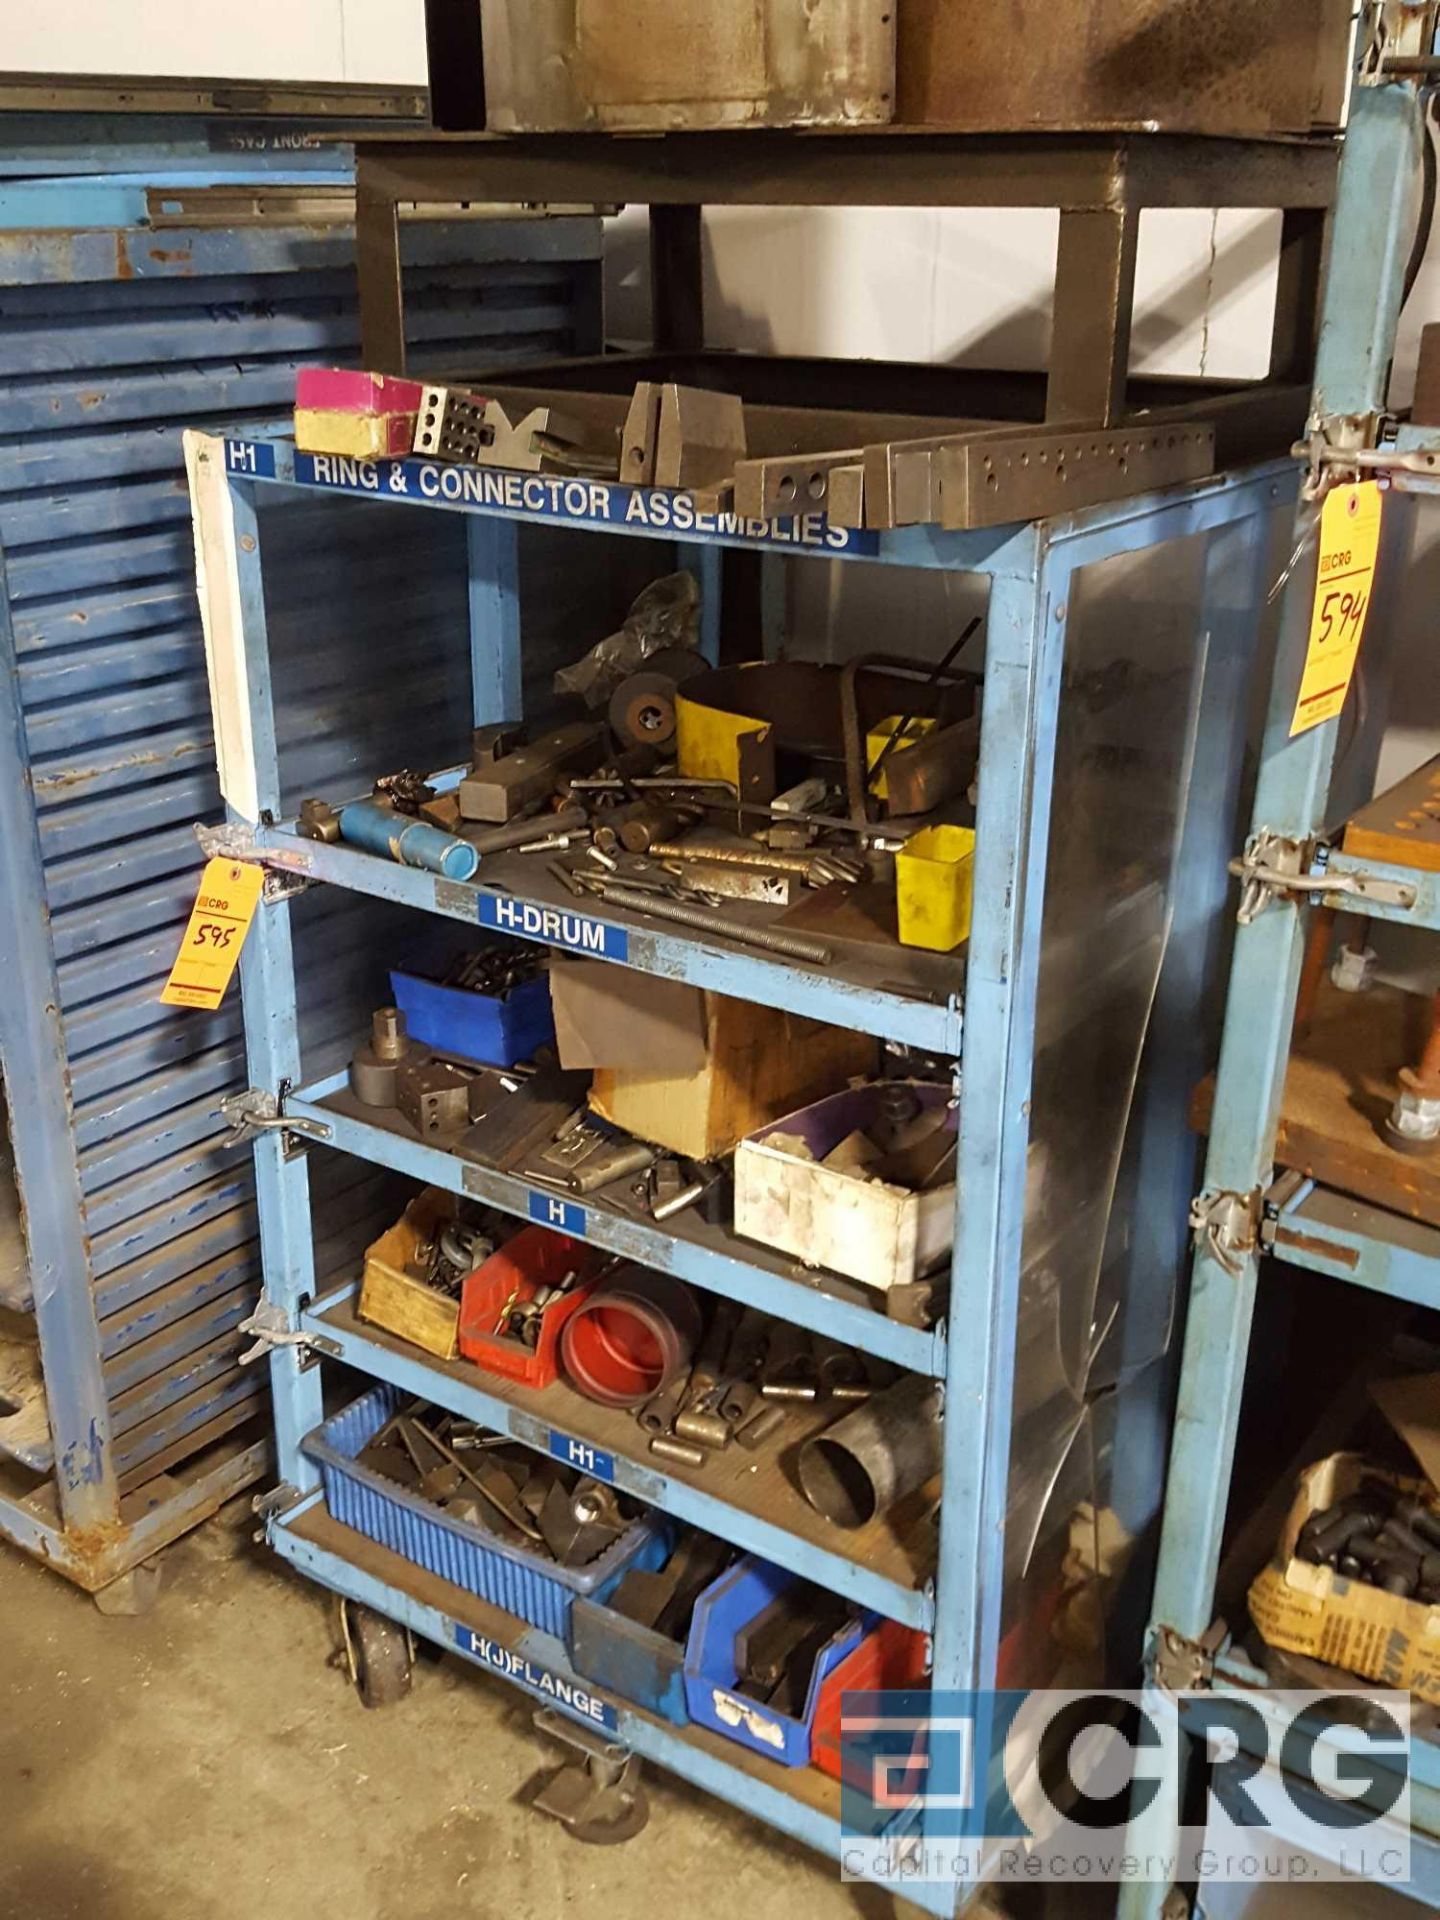 Lot includes (1) portable shop cart with slide out shelves and all contents of assorted machine